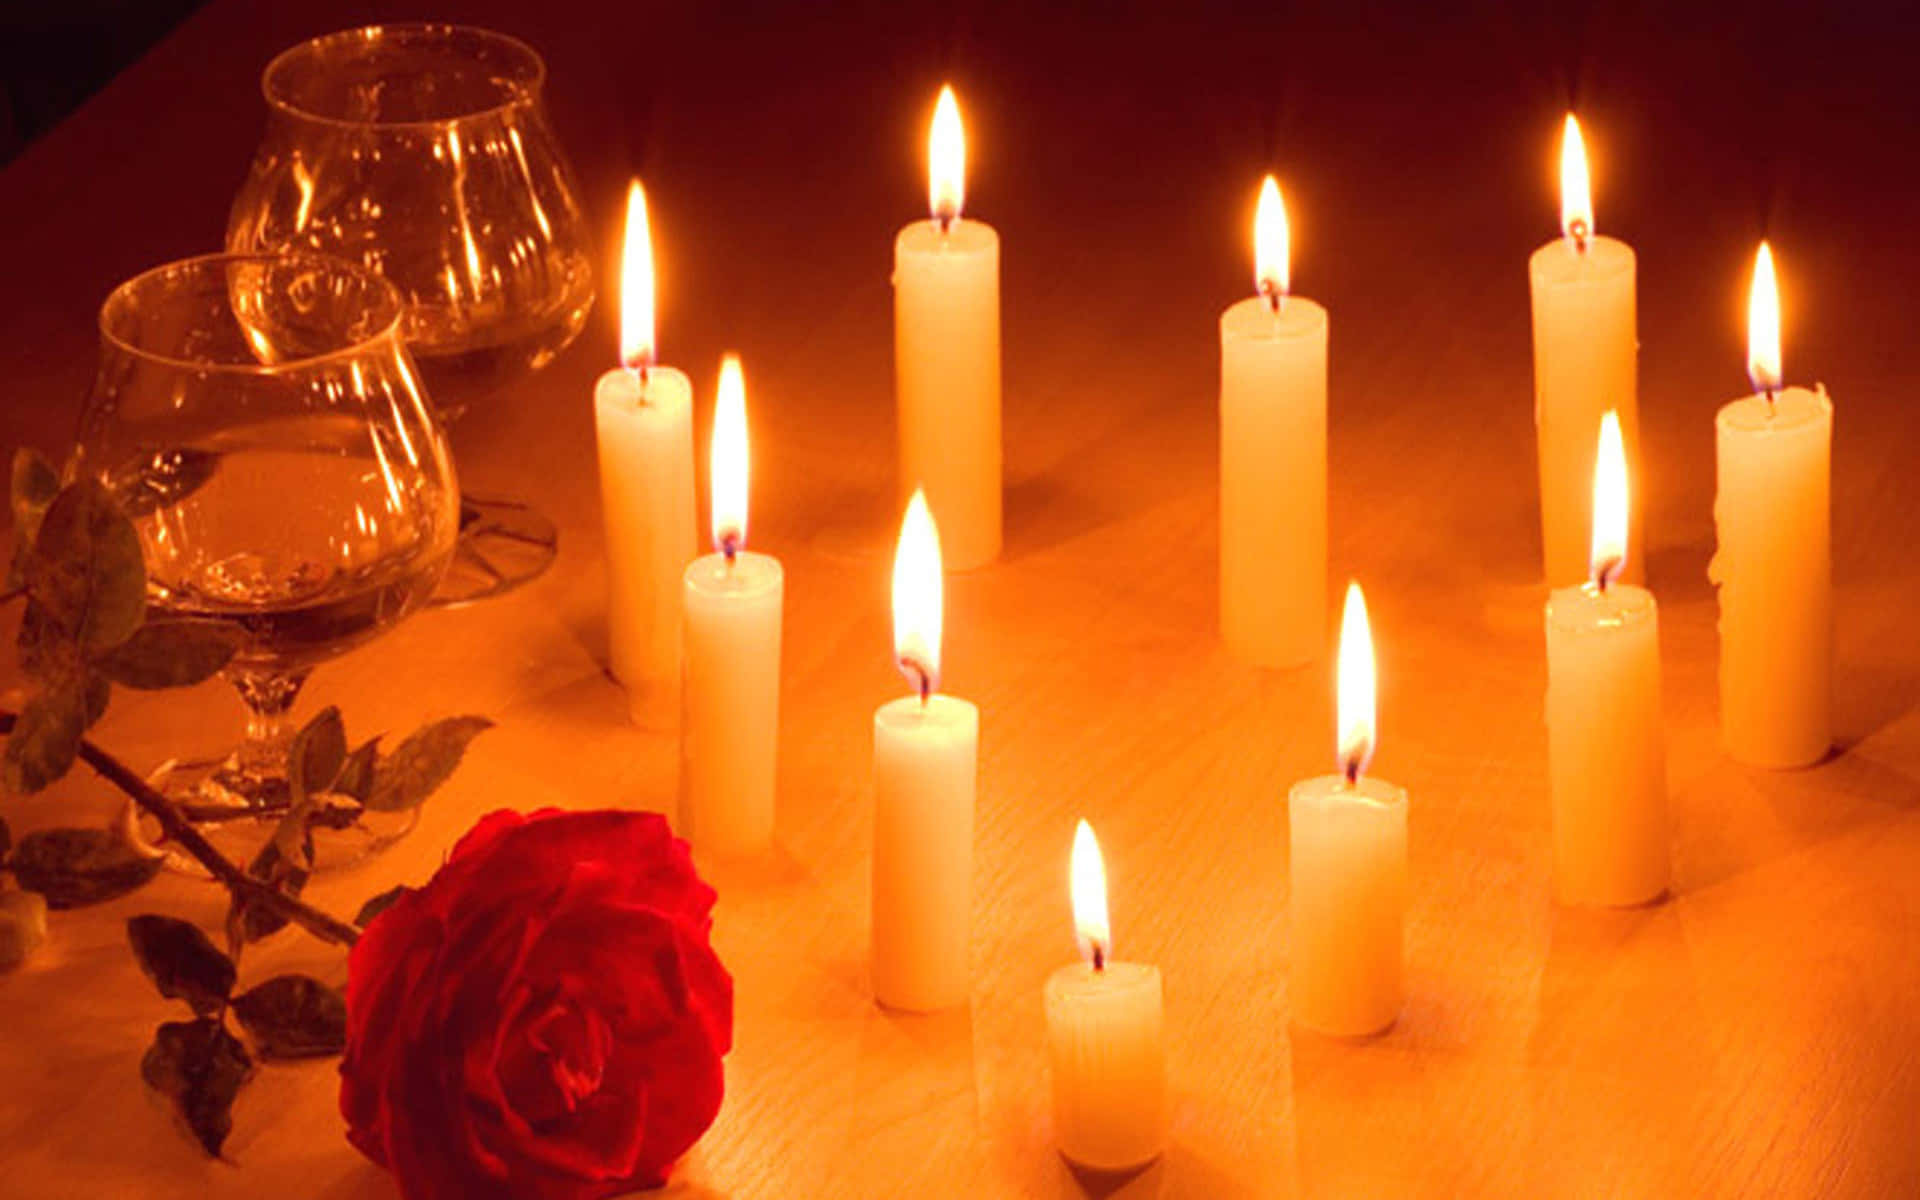 A Group Of Candles And A Rose On A Table